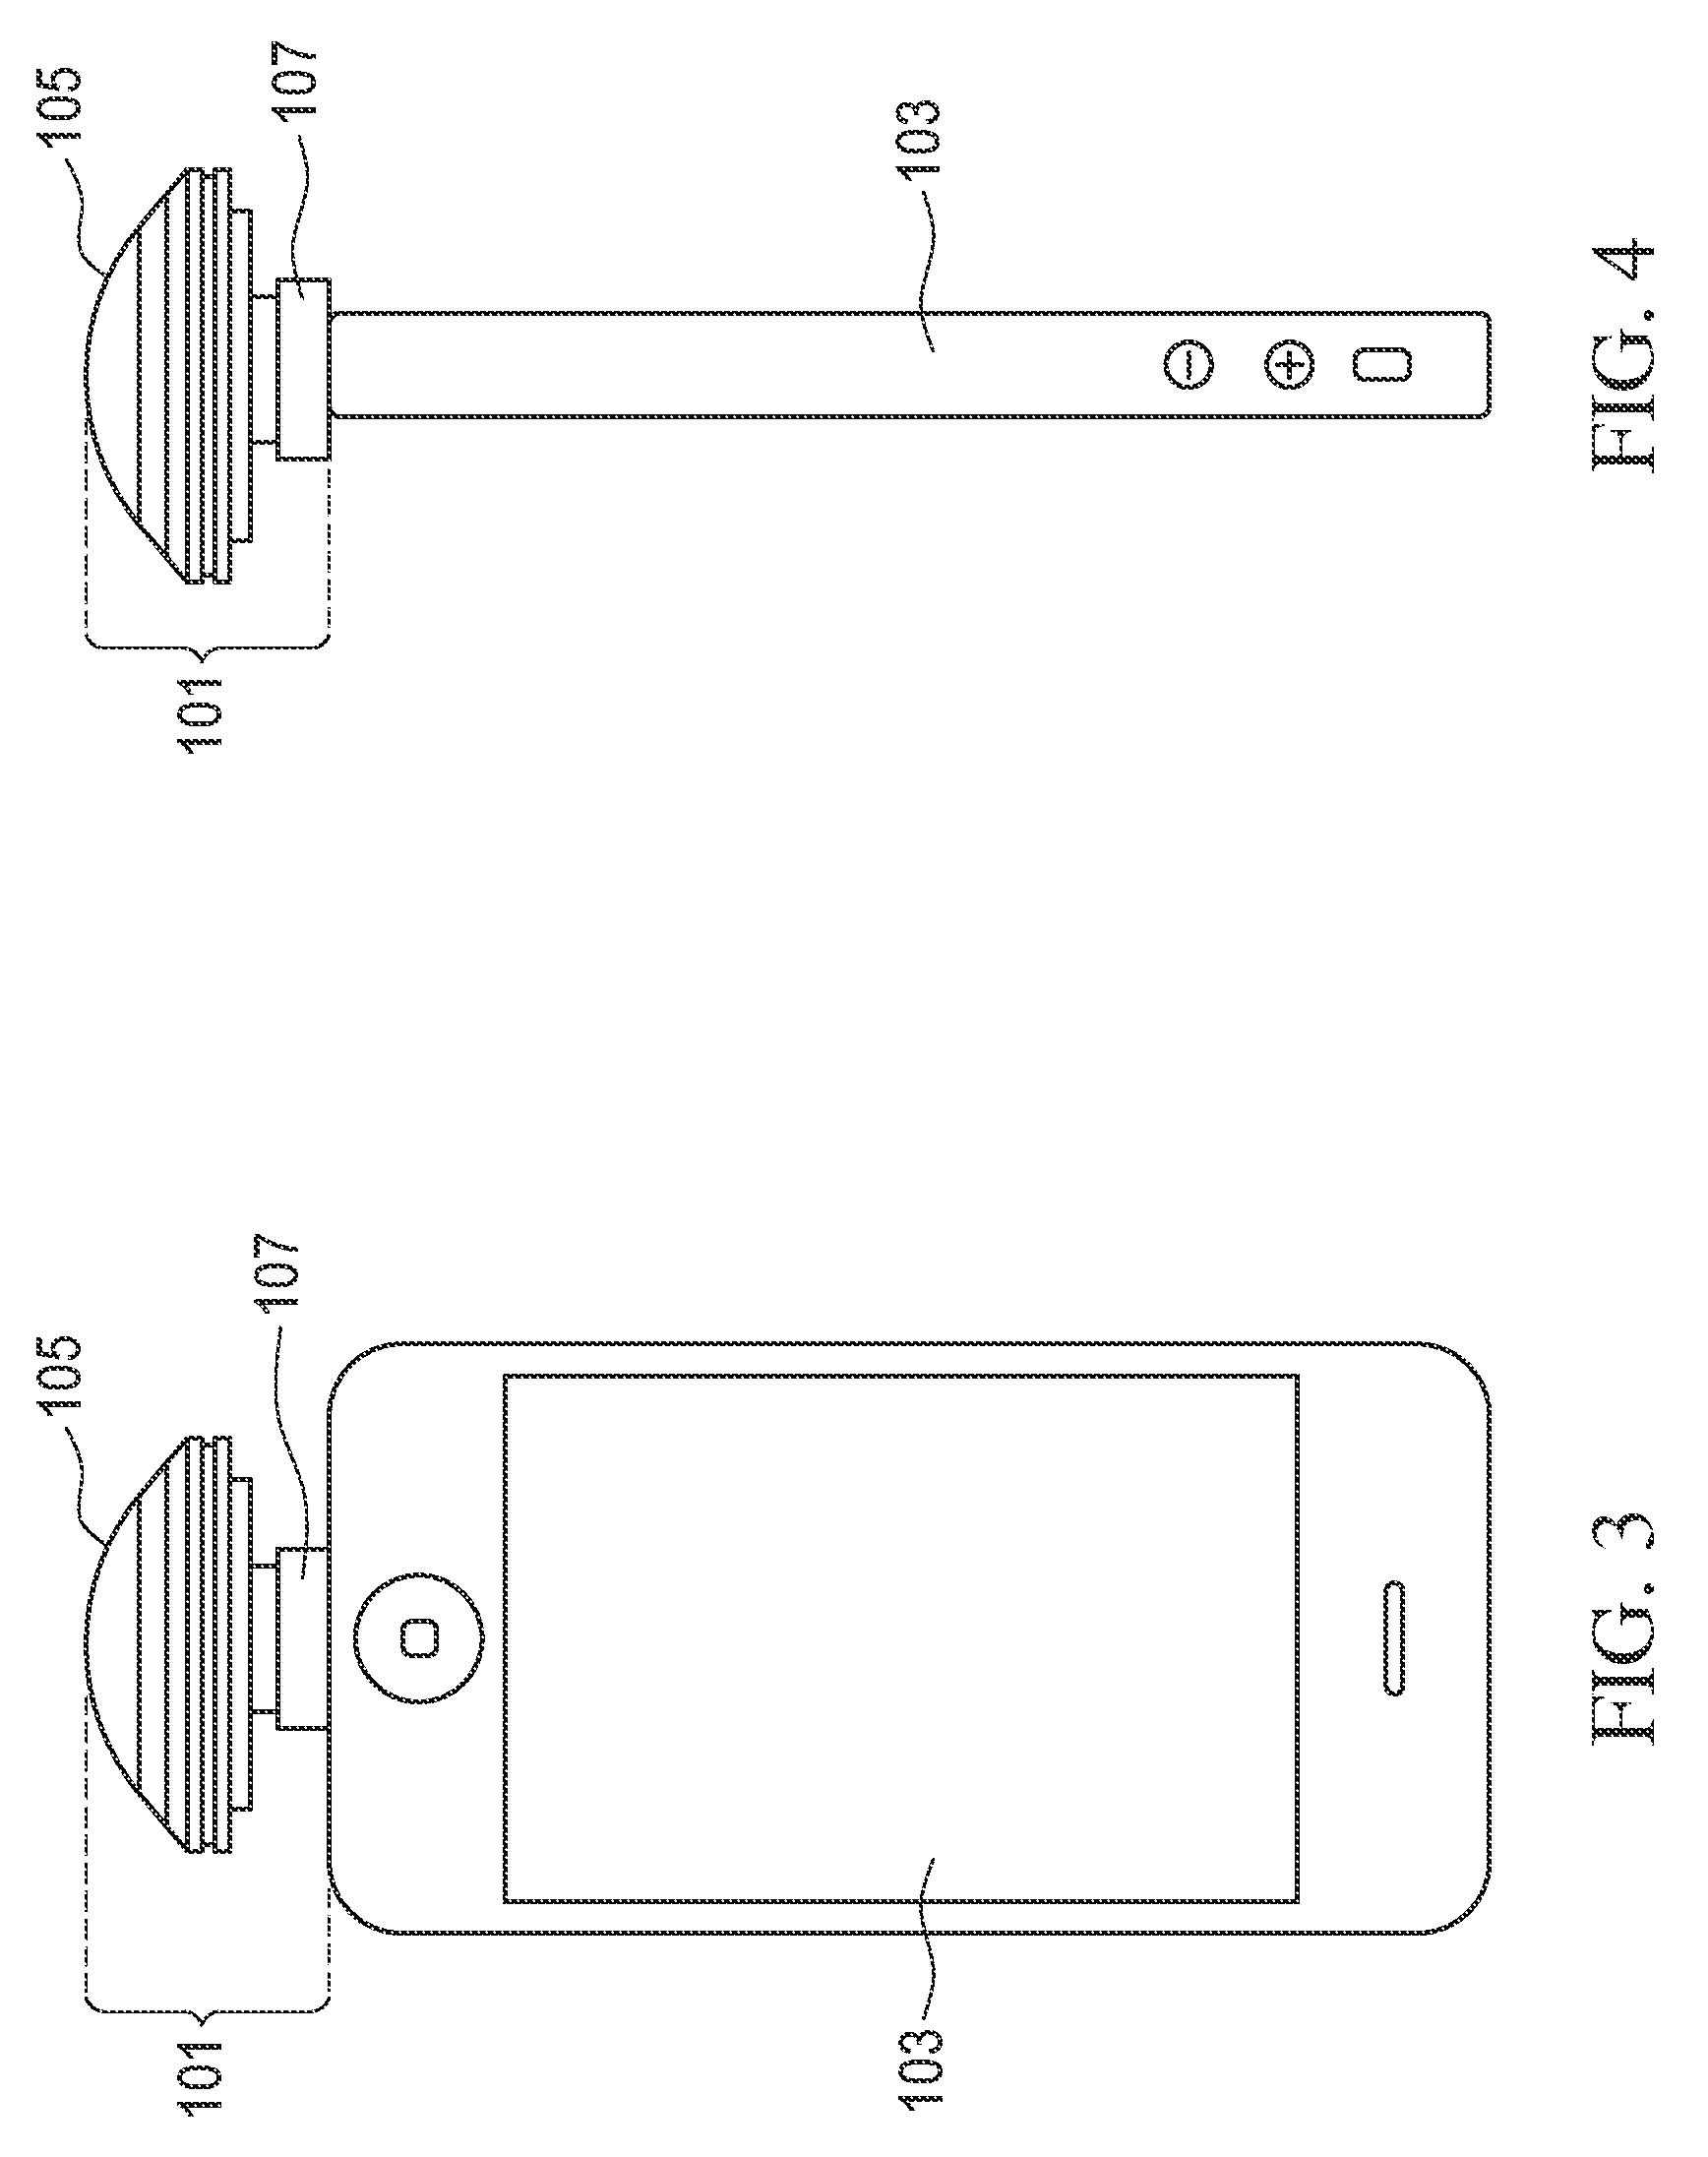 Mobile Device-Mountable Panoramic Camera System and Method of Displaying Images Captured Therefrom